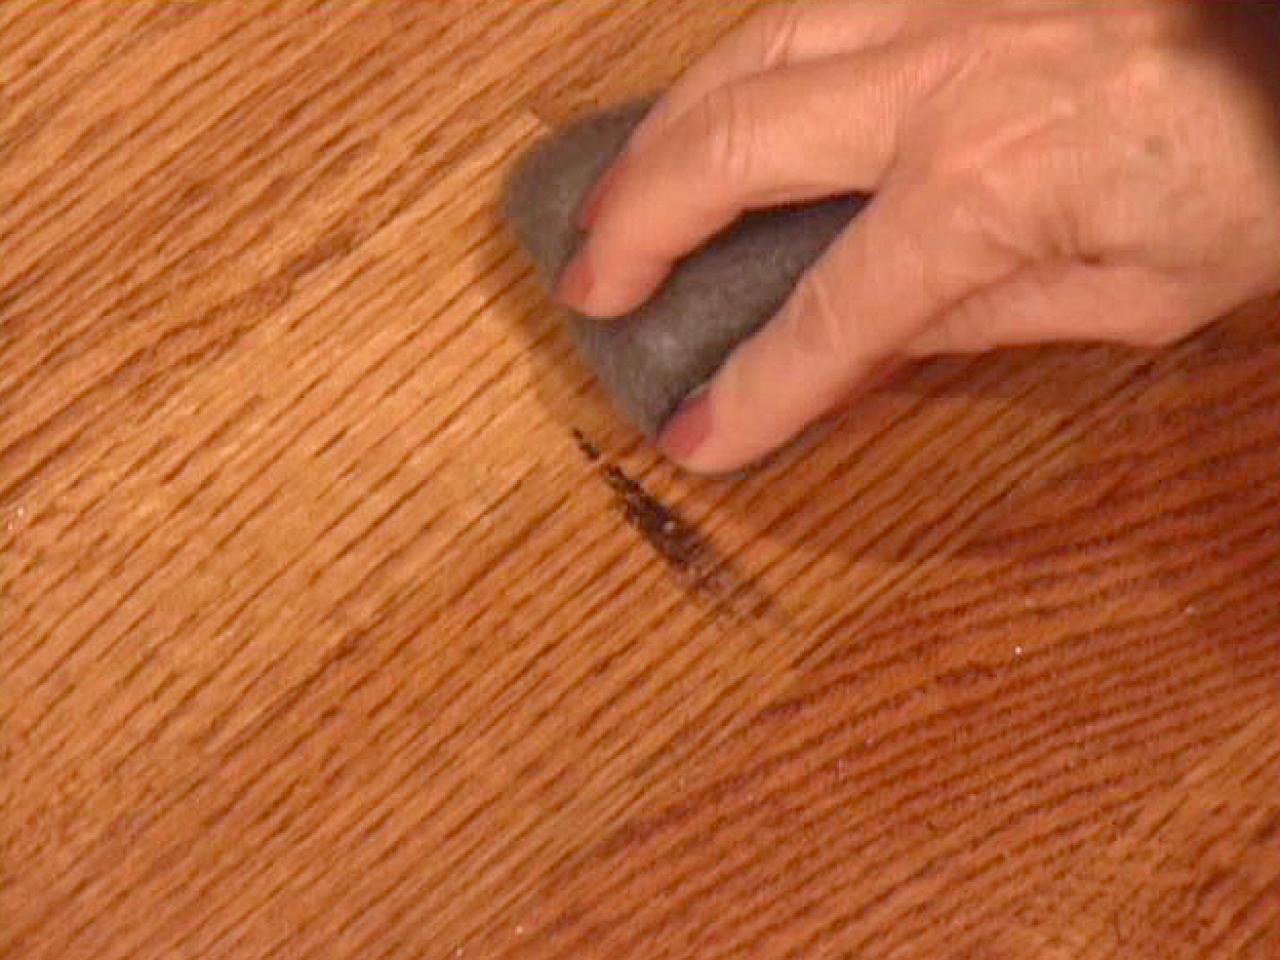 How To Touch Up Wood Floors Tos Diy, How To Get Scratches Out Of Hardwood Floor Finish